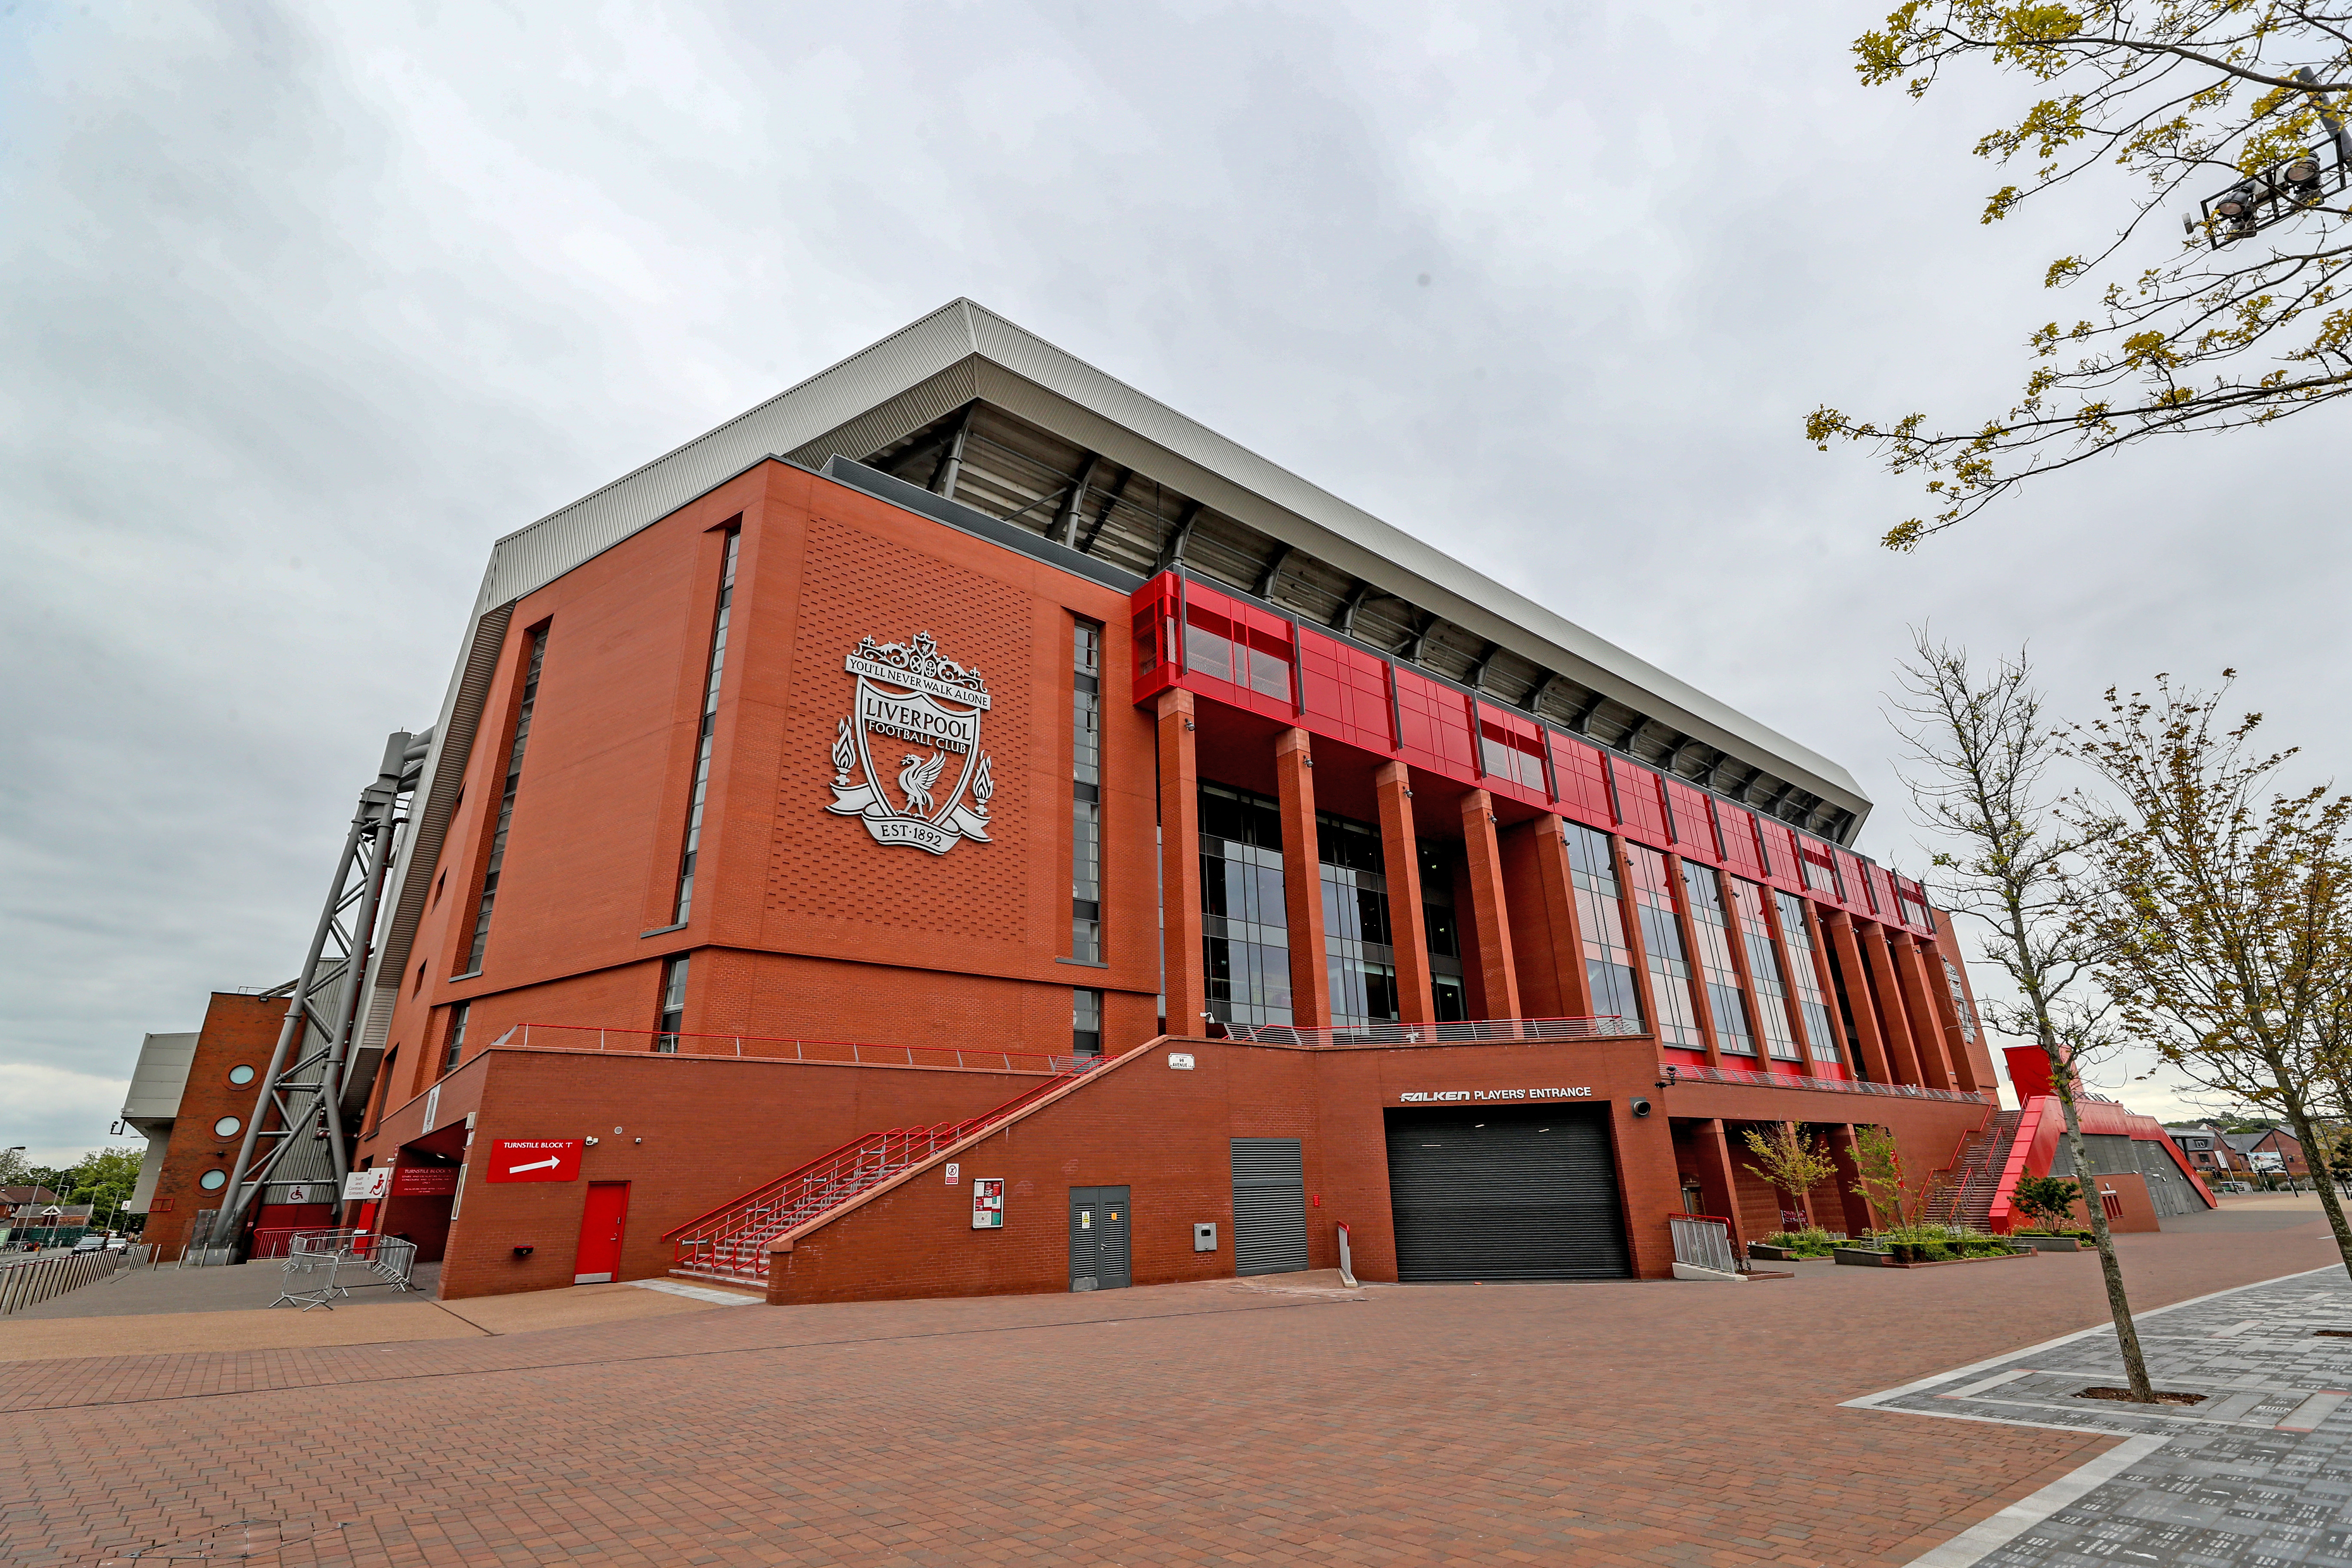 Liverpool might not be allowed to play in Liverpool until they're crowned champions according to some reports. Image: PA Images